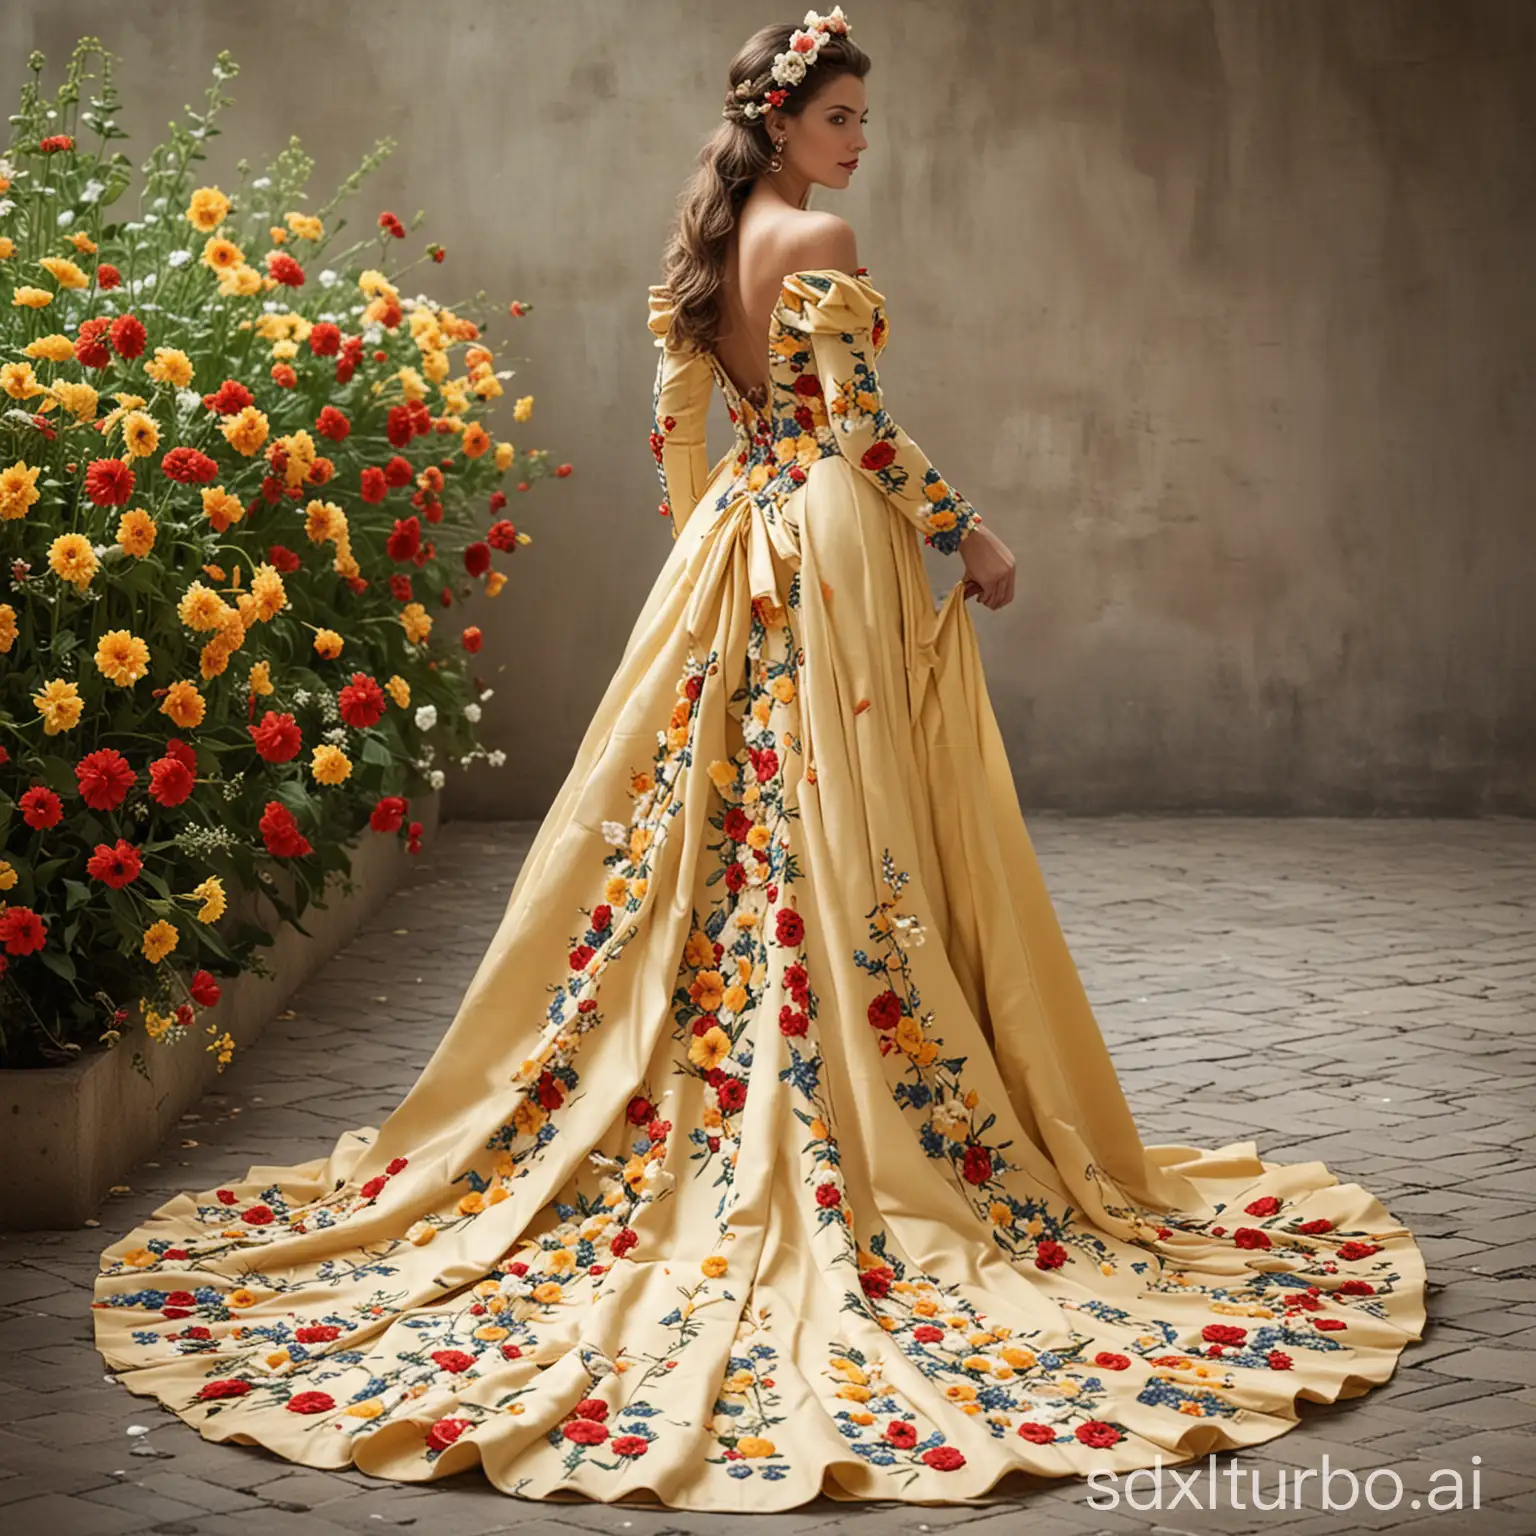 Elegant-Lady-Wearing-a-Long-Floral-Gown